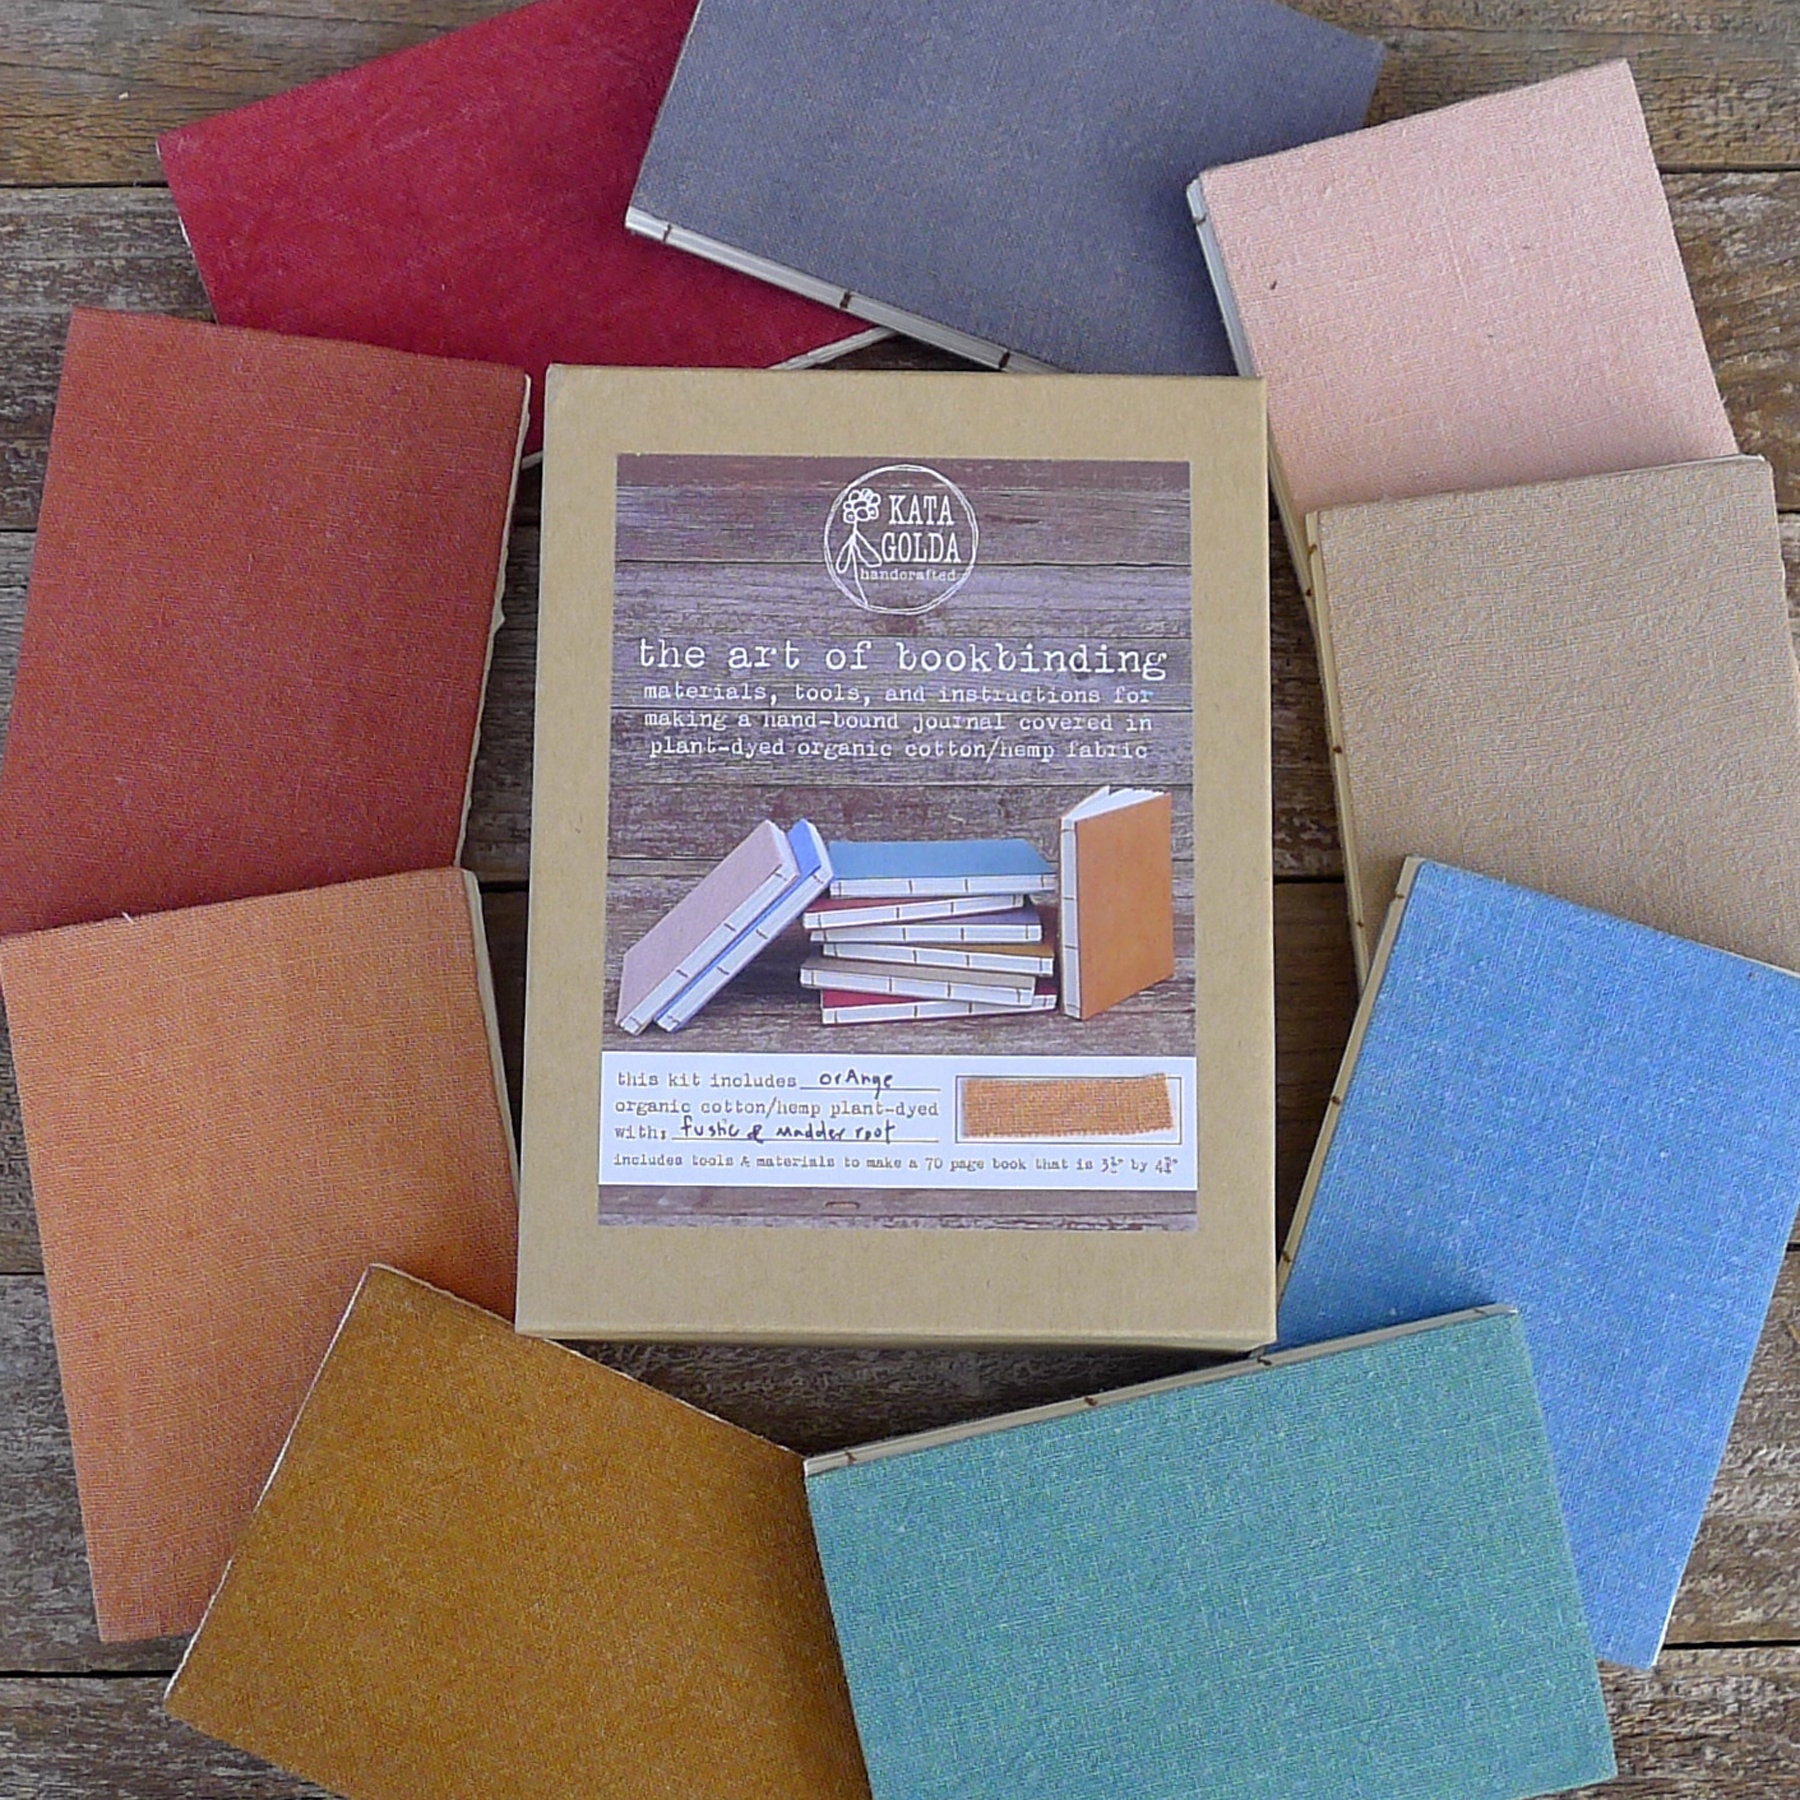 DIY Bookbinding Kit to Make Your Own Journal Book Diary With